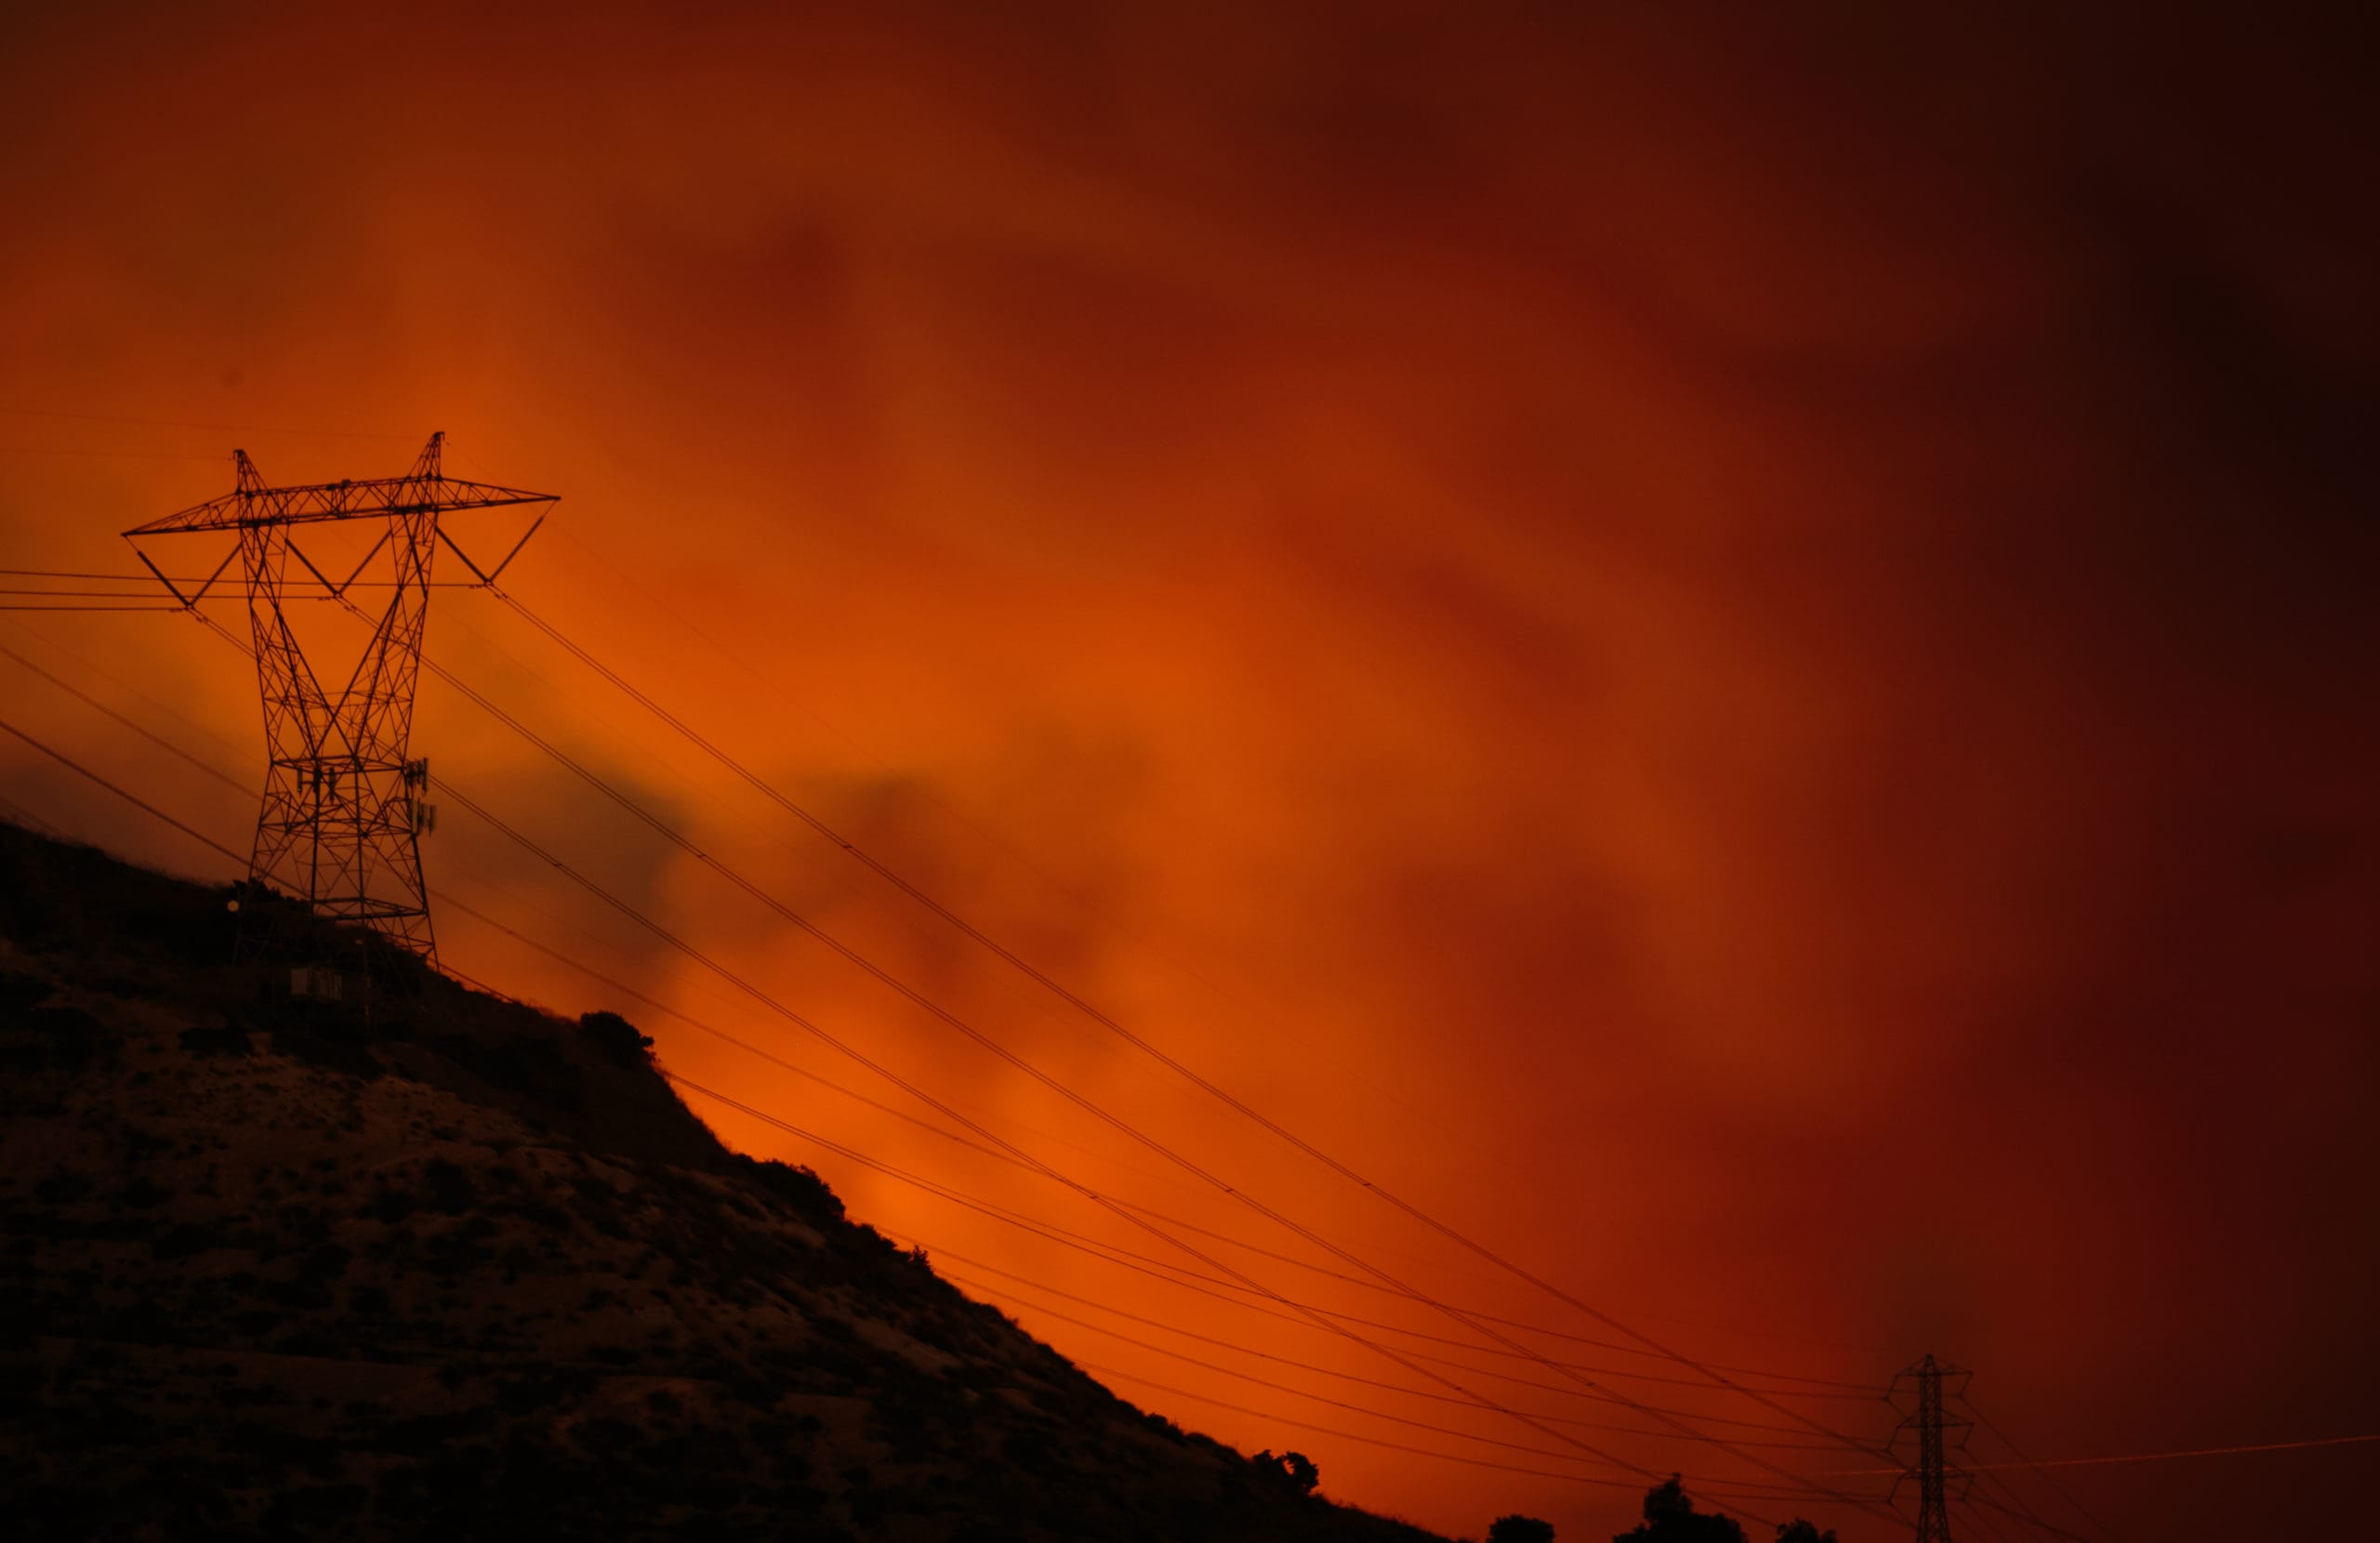 California wildfires create a red sky with a utility tower showing the need for reinforced cabling